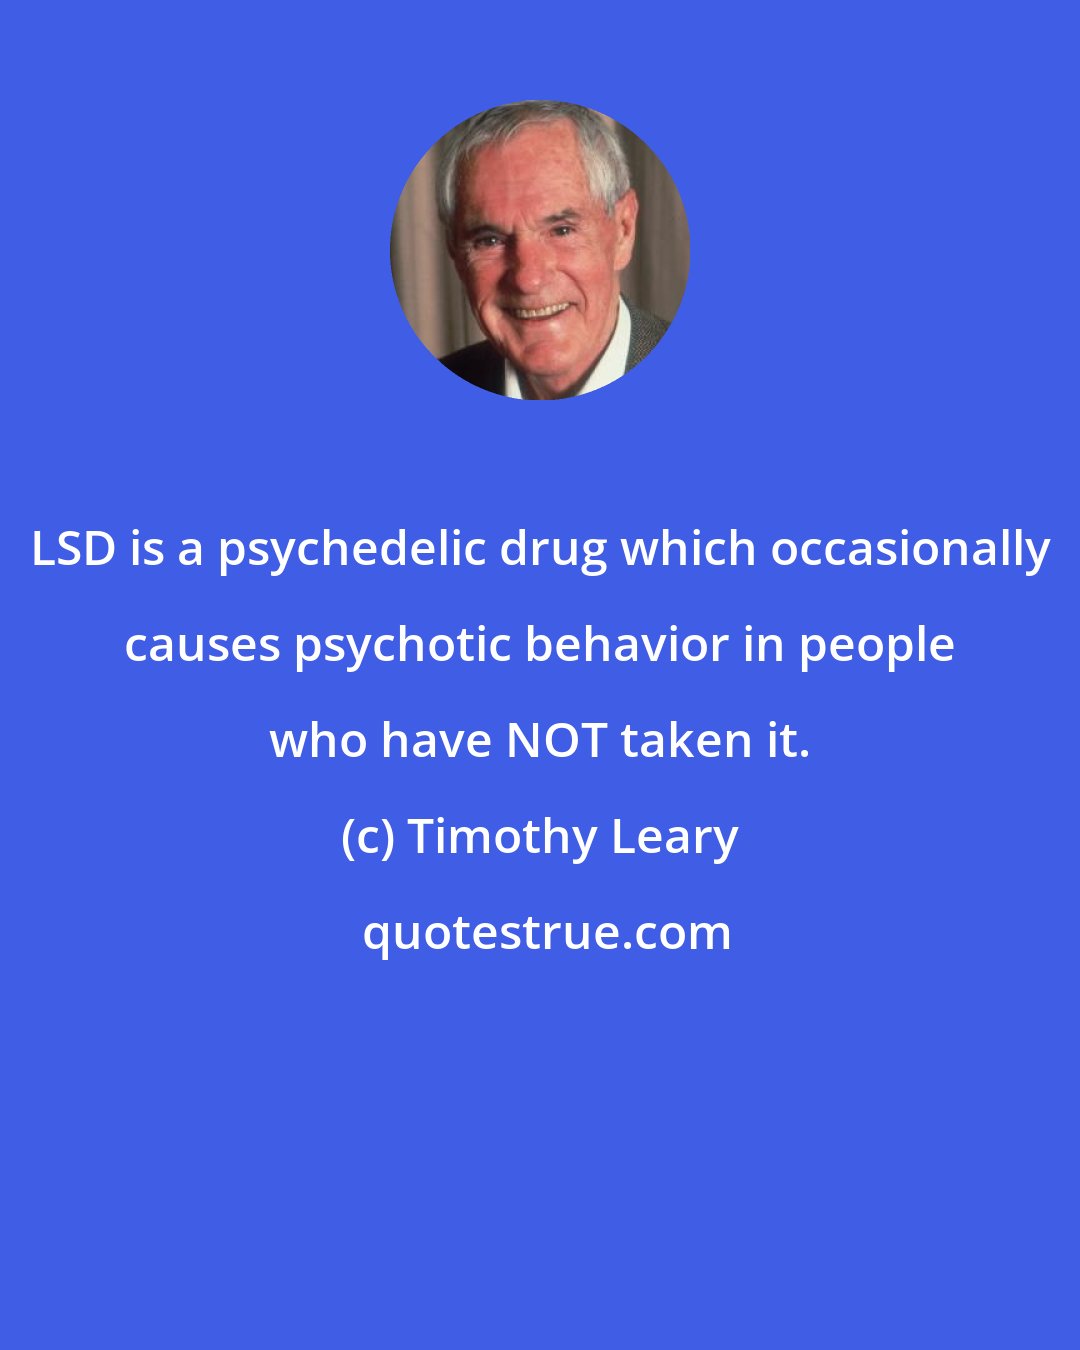 Timothy Leary: LSD is a psychedelic drug which occasionally causes psychotic behavior in people who have NOT taken it.